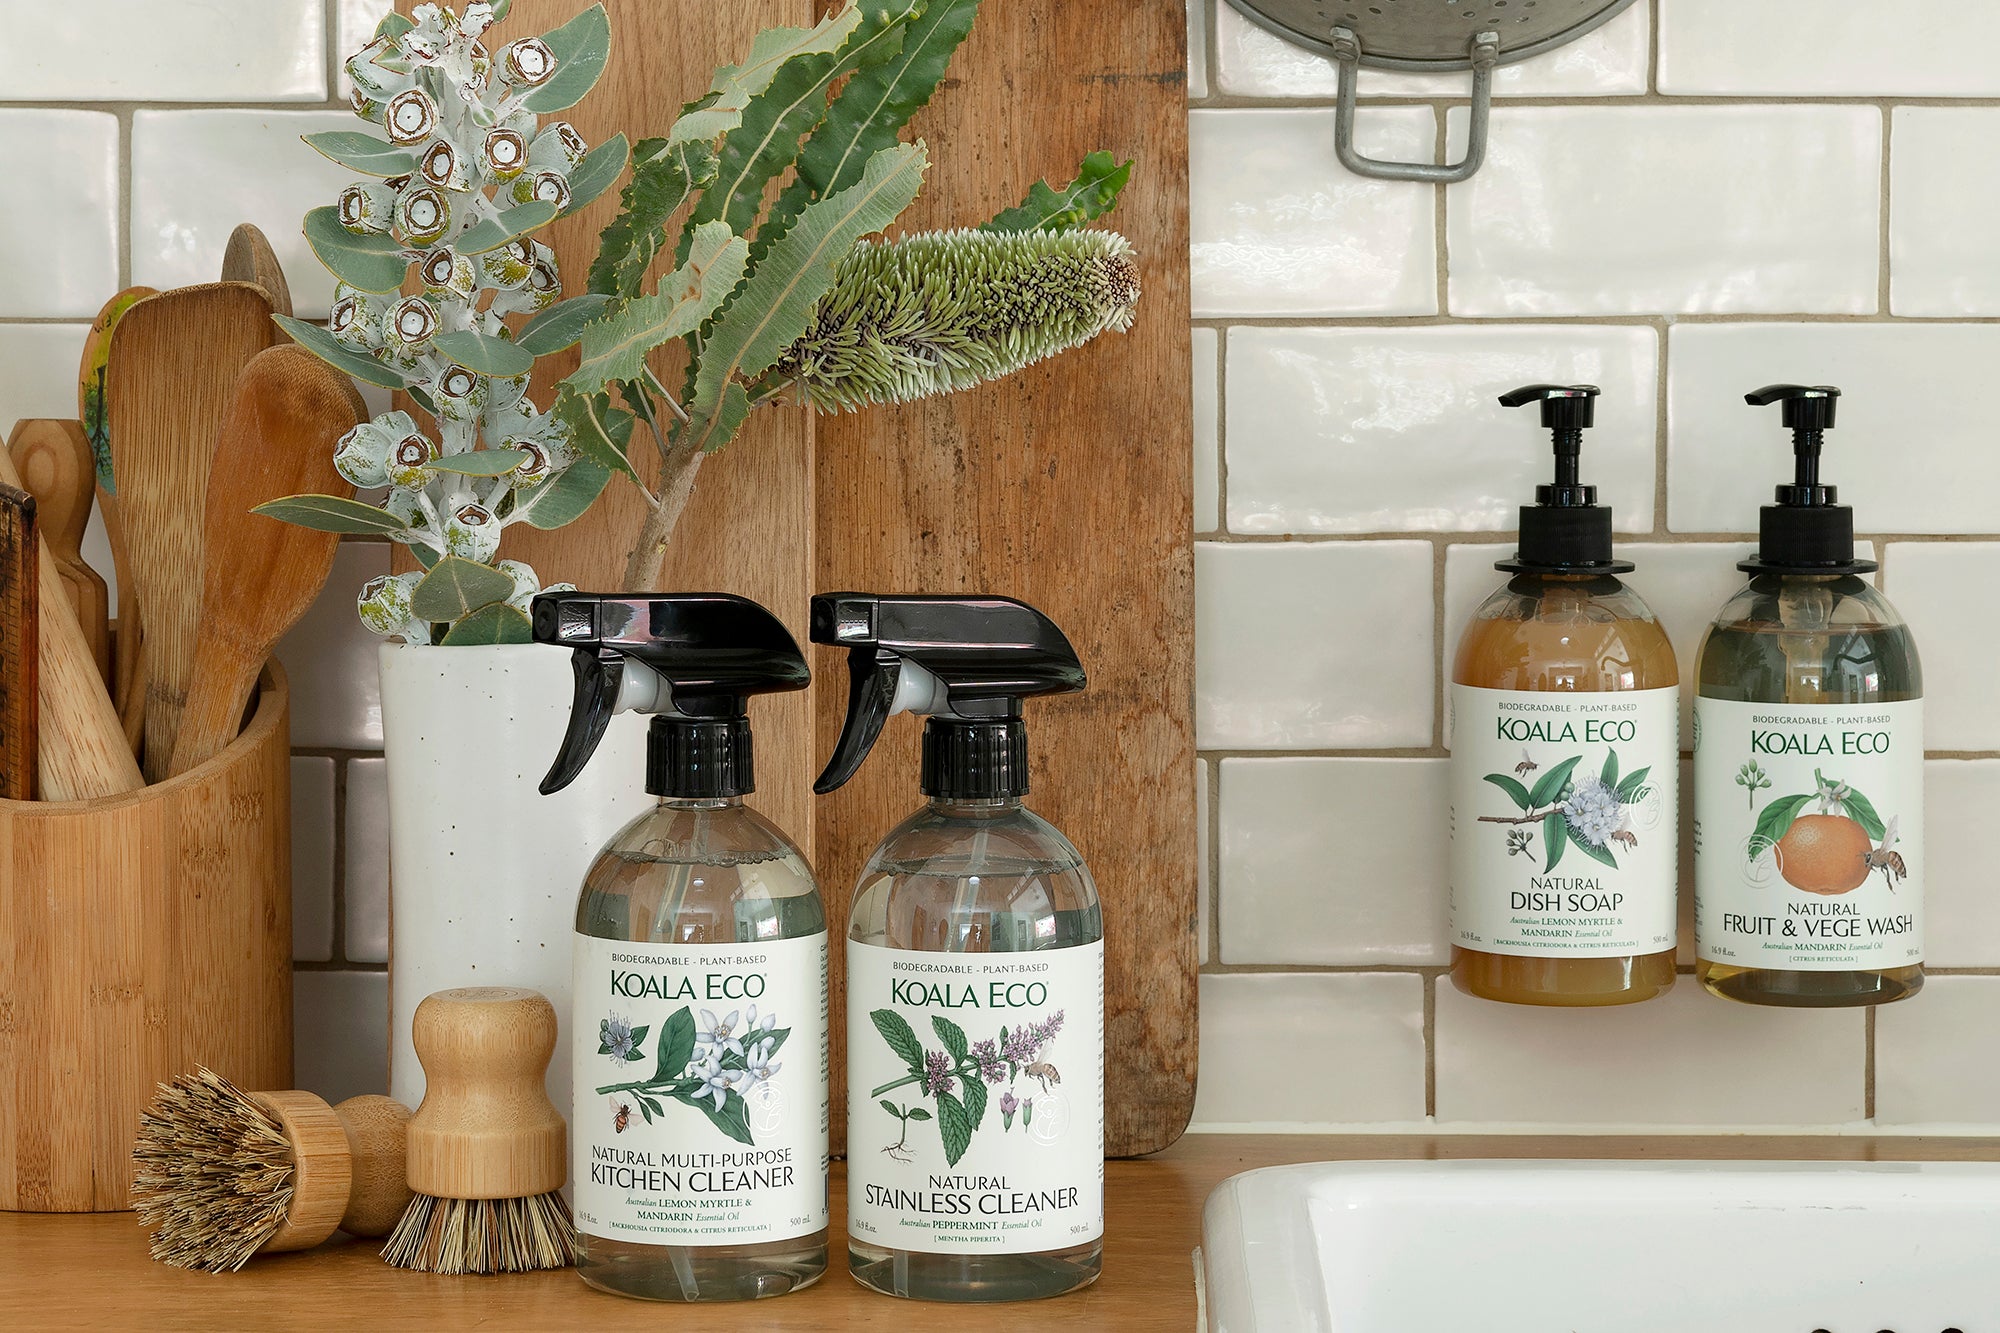 Koala Eco-Eco Friendly Cleaning Products